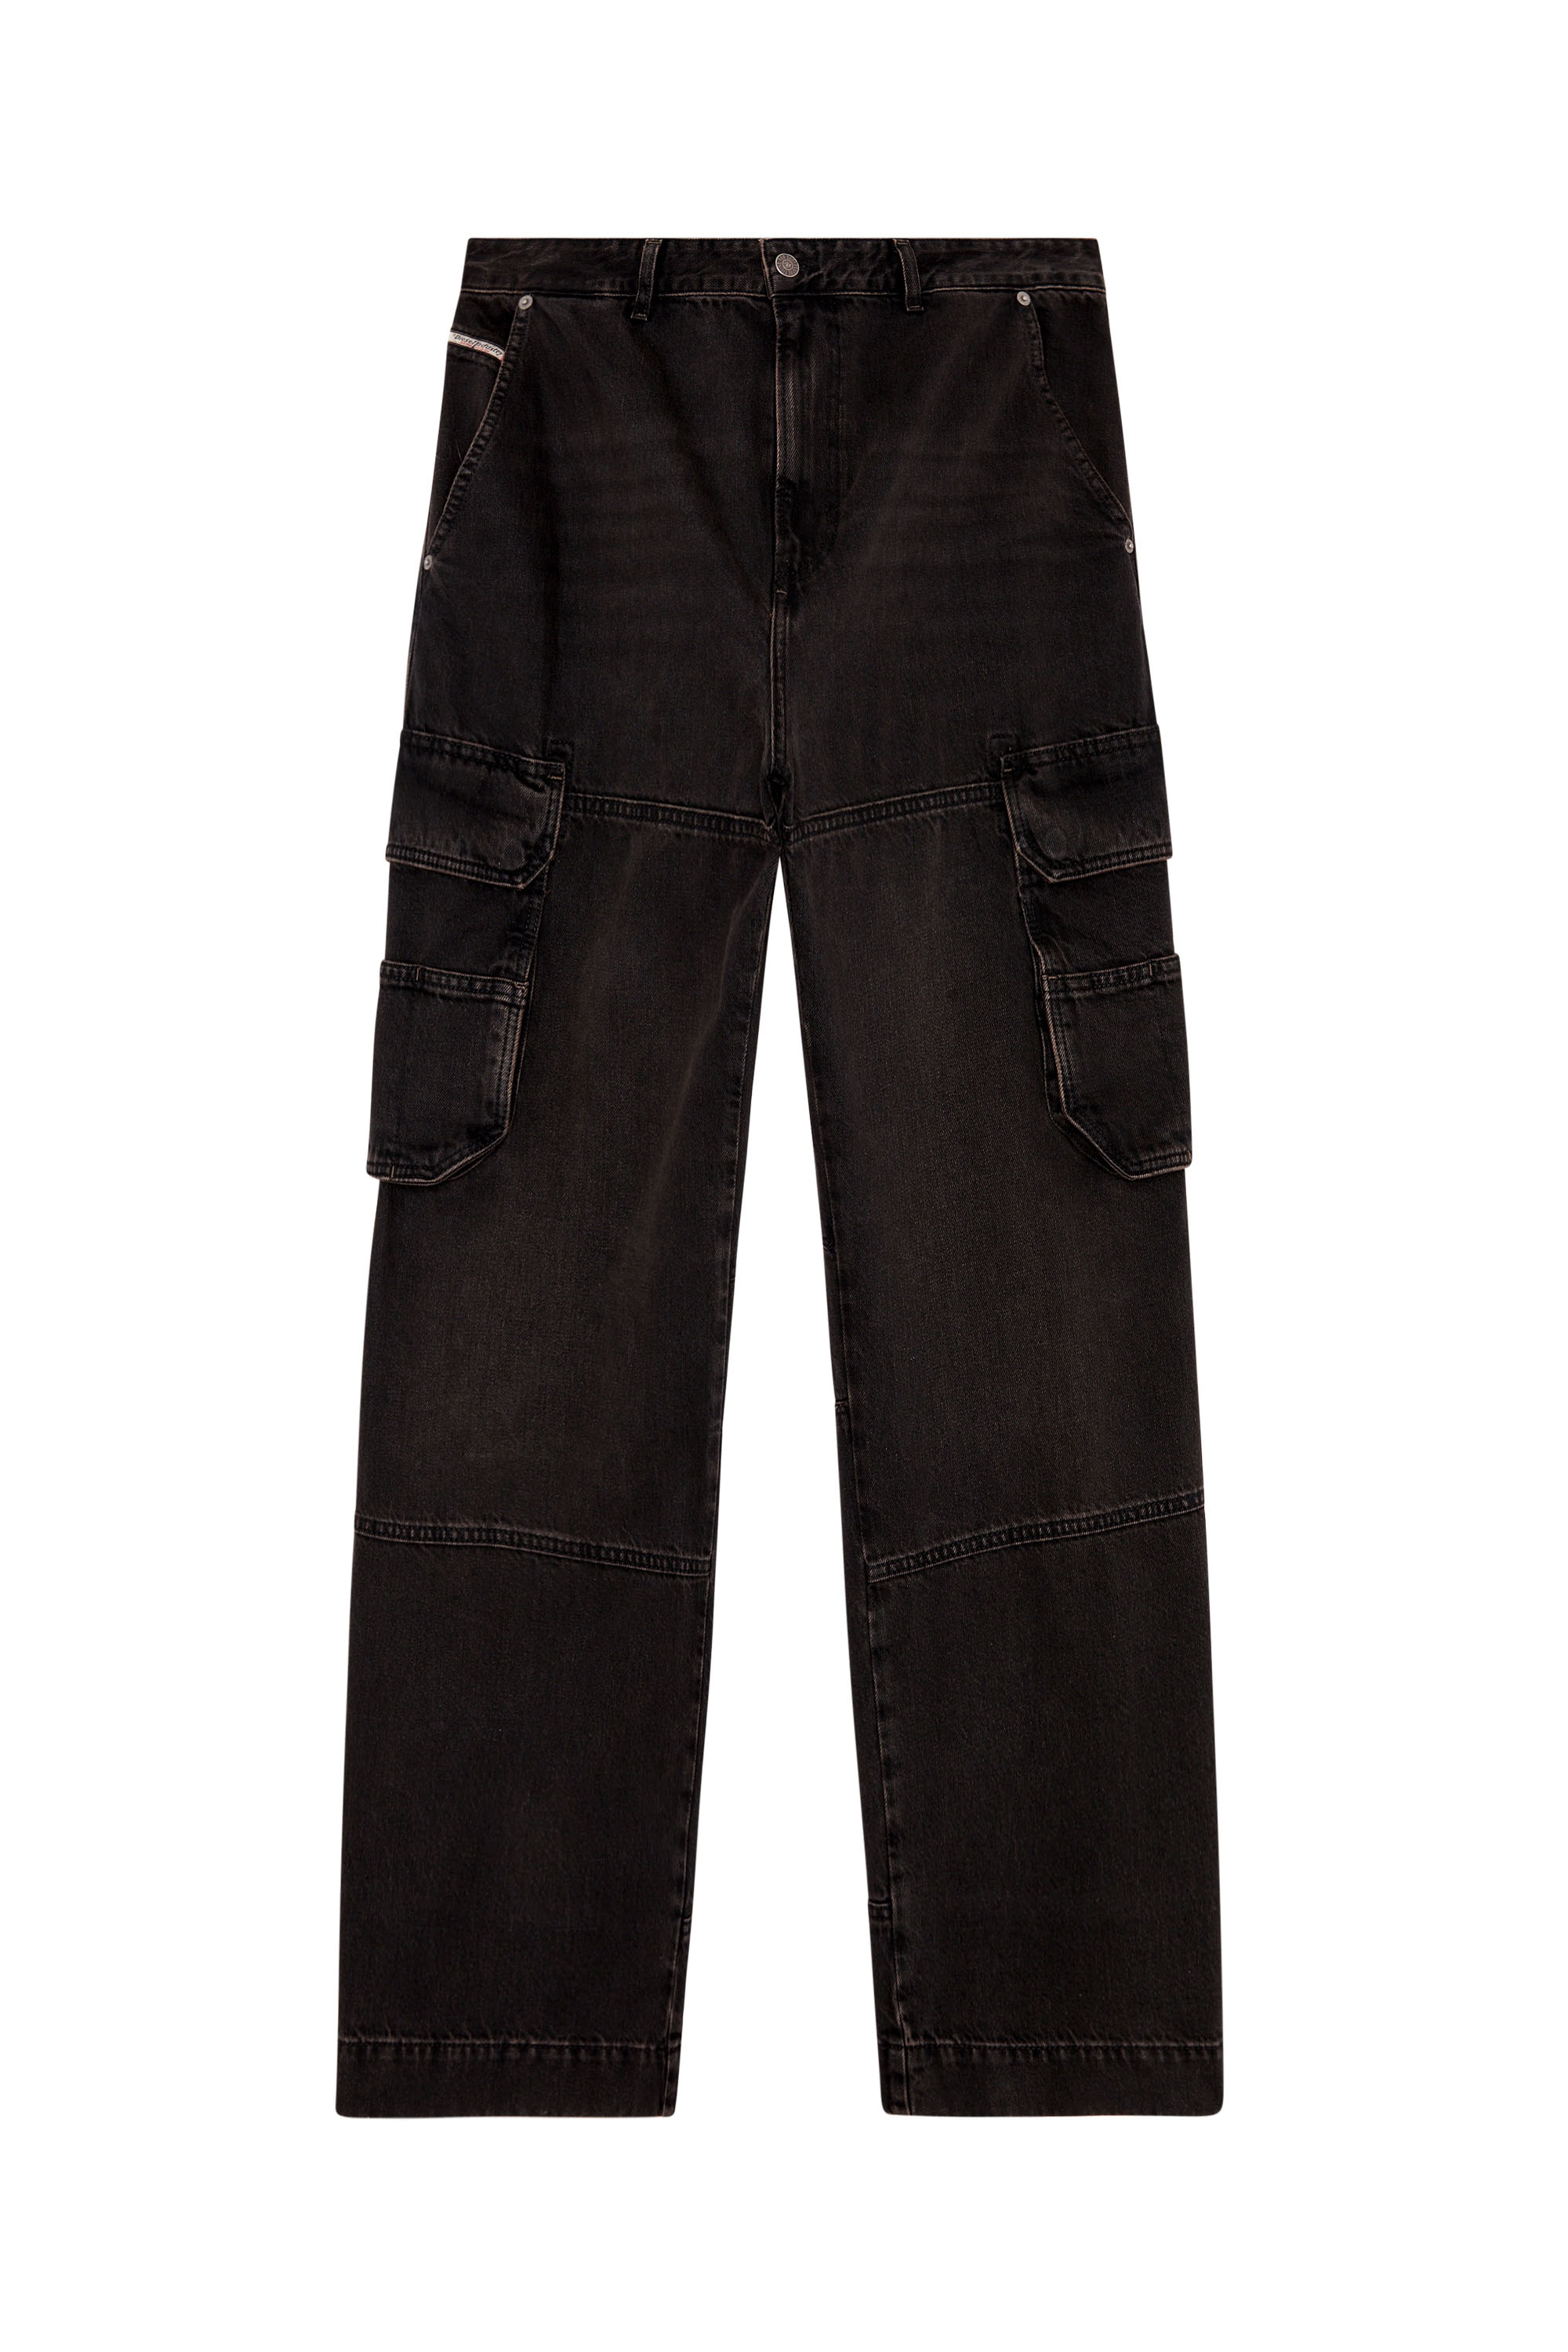 Diesel - Straight Jeans D-Fish 0KIAG, Hombre Straight Jeans - D-Fish in Negro - Image 3